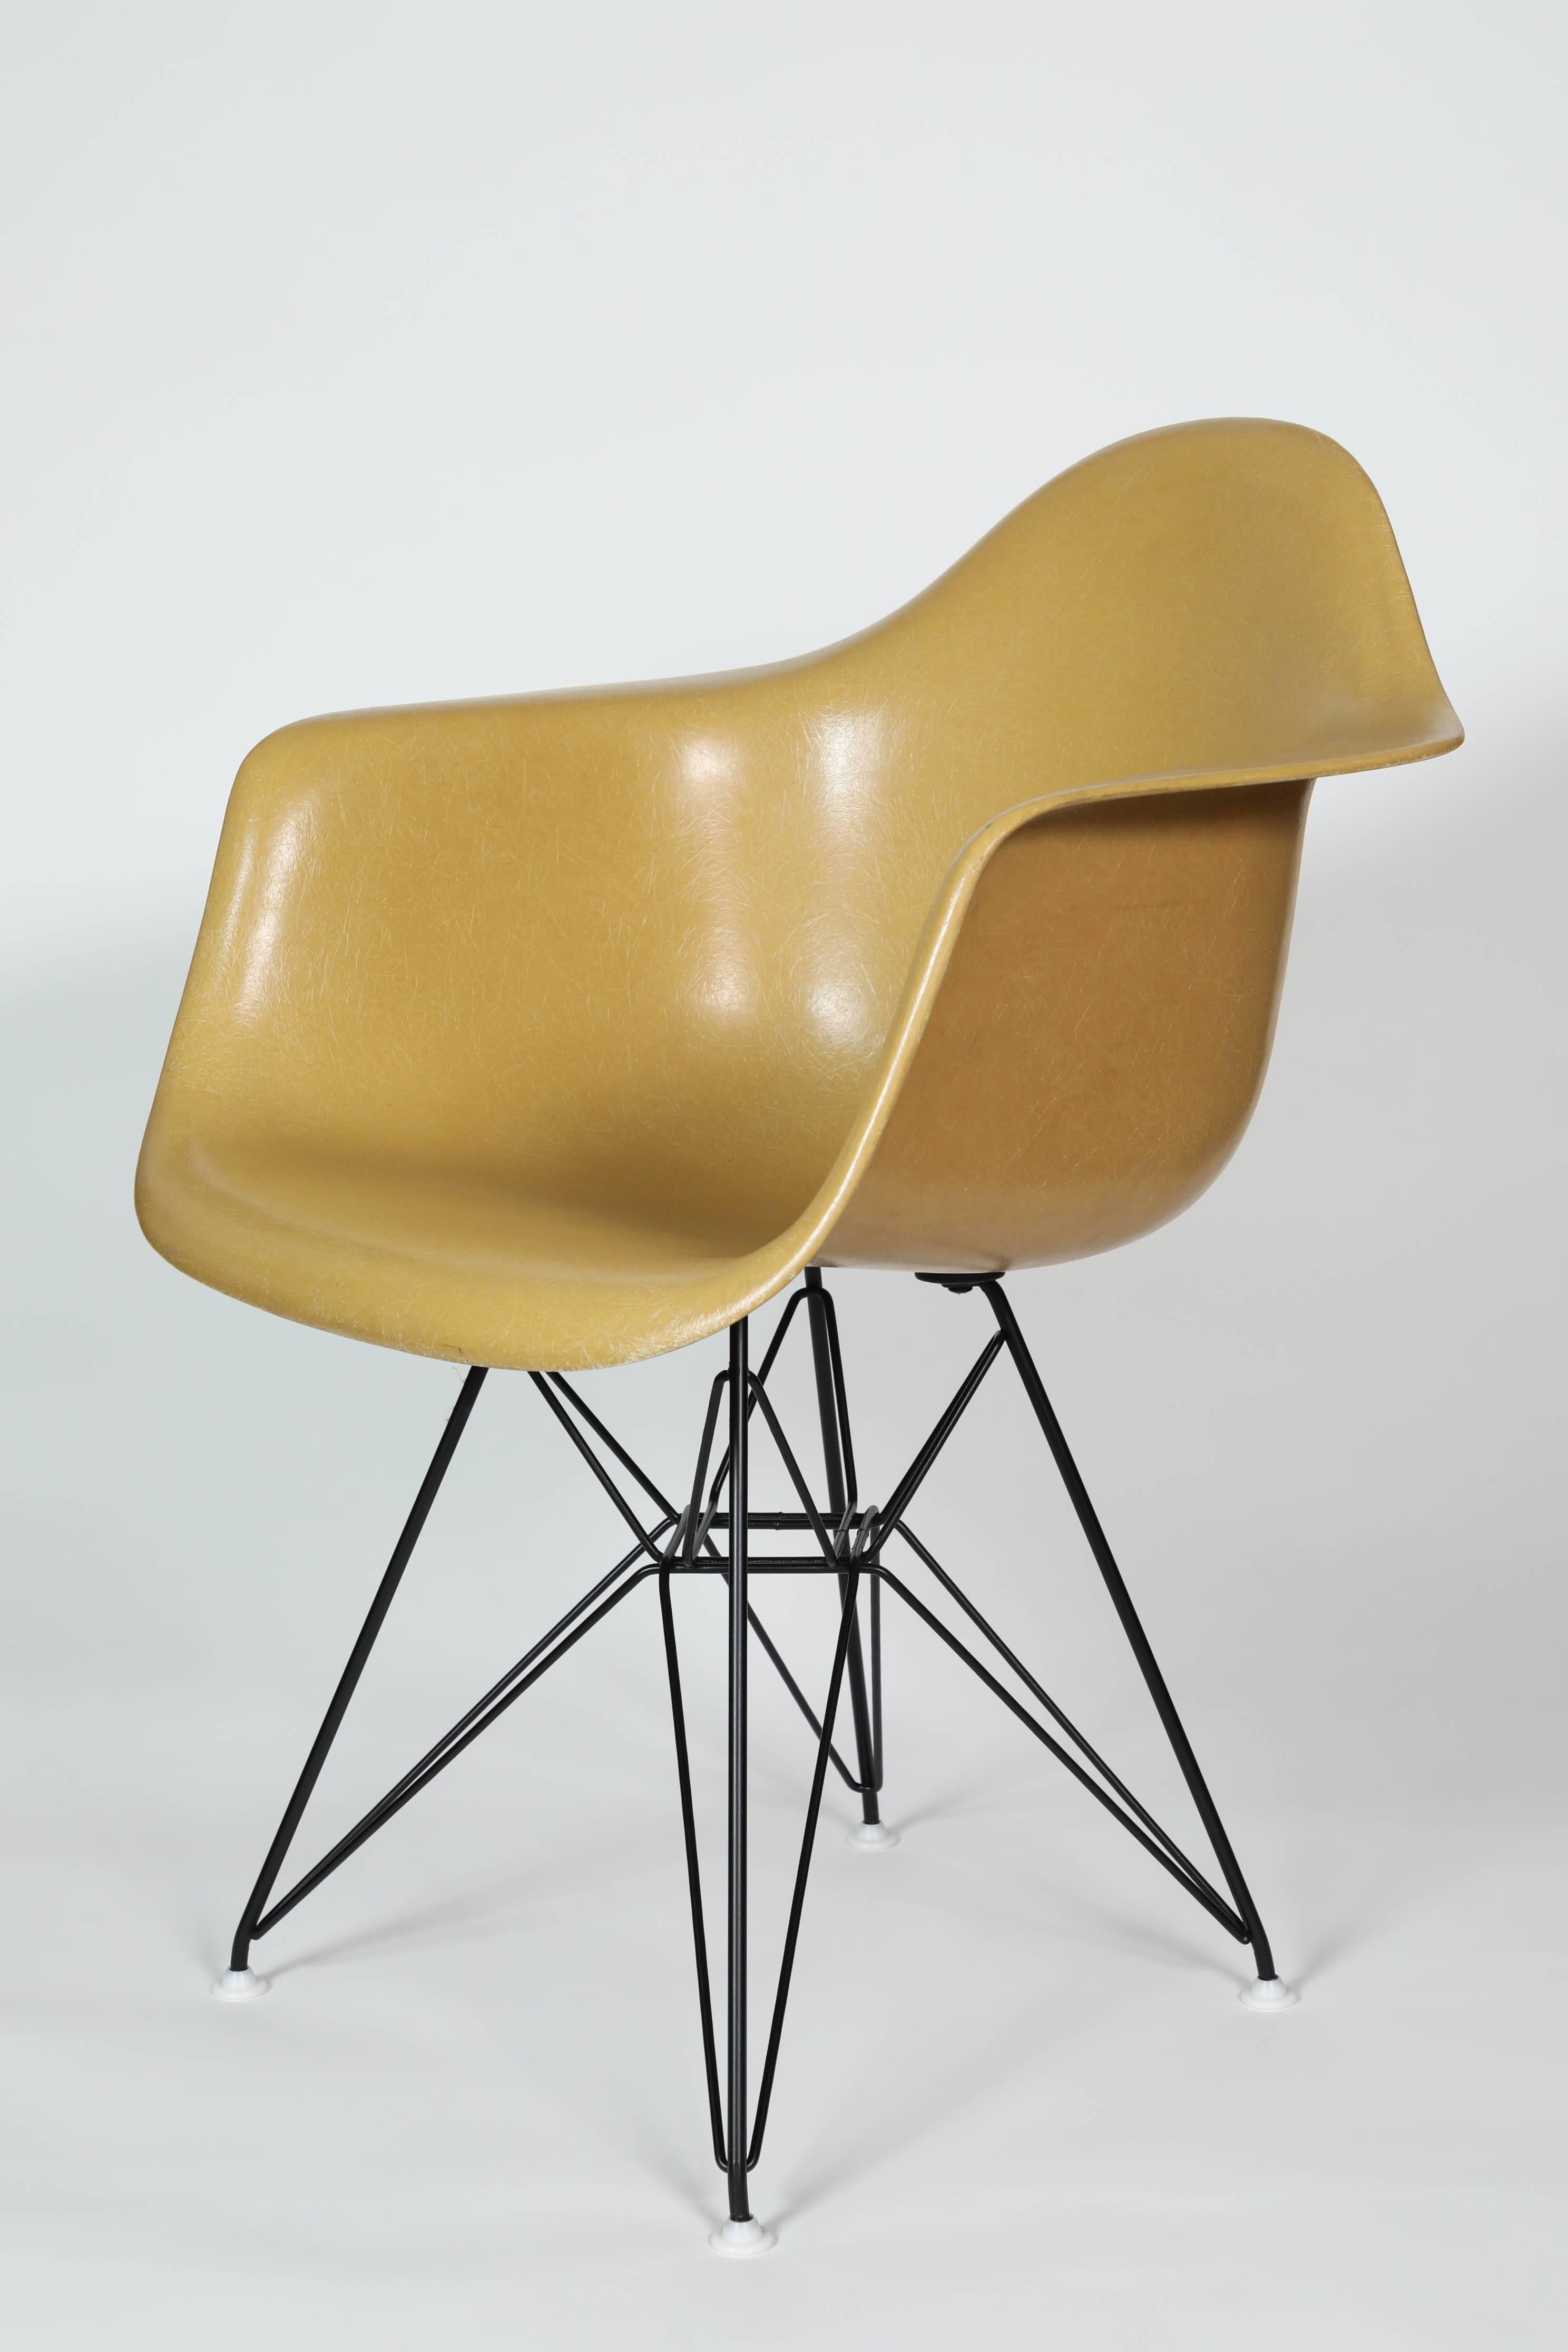 Set of four mustard colored Eames Herman Miller fiberglass shell armchairs, with original Herman Miller mark. Eiffel tower base is in great condition.
 